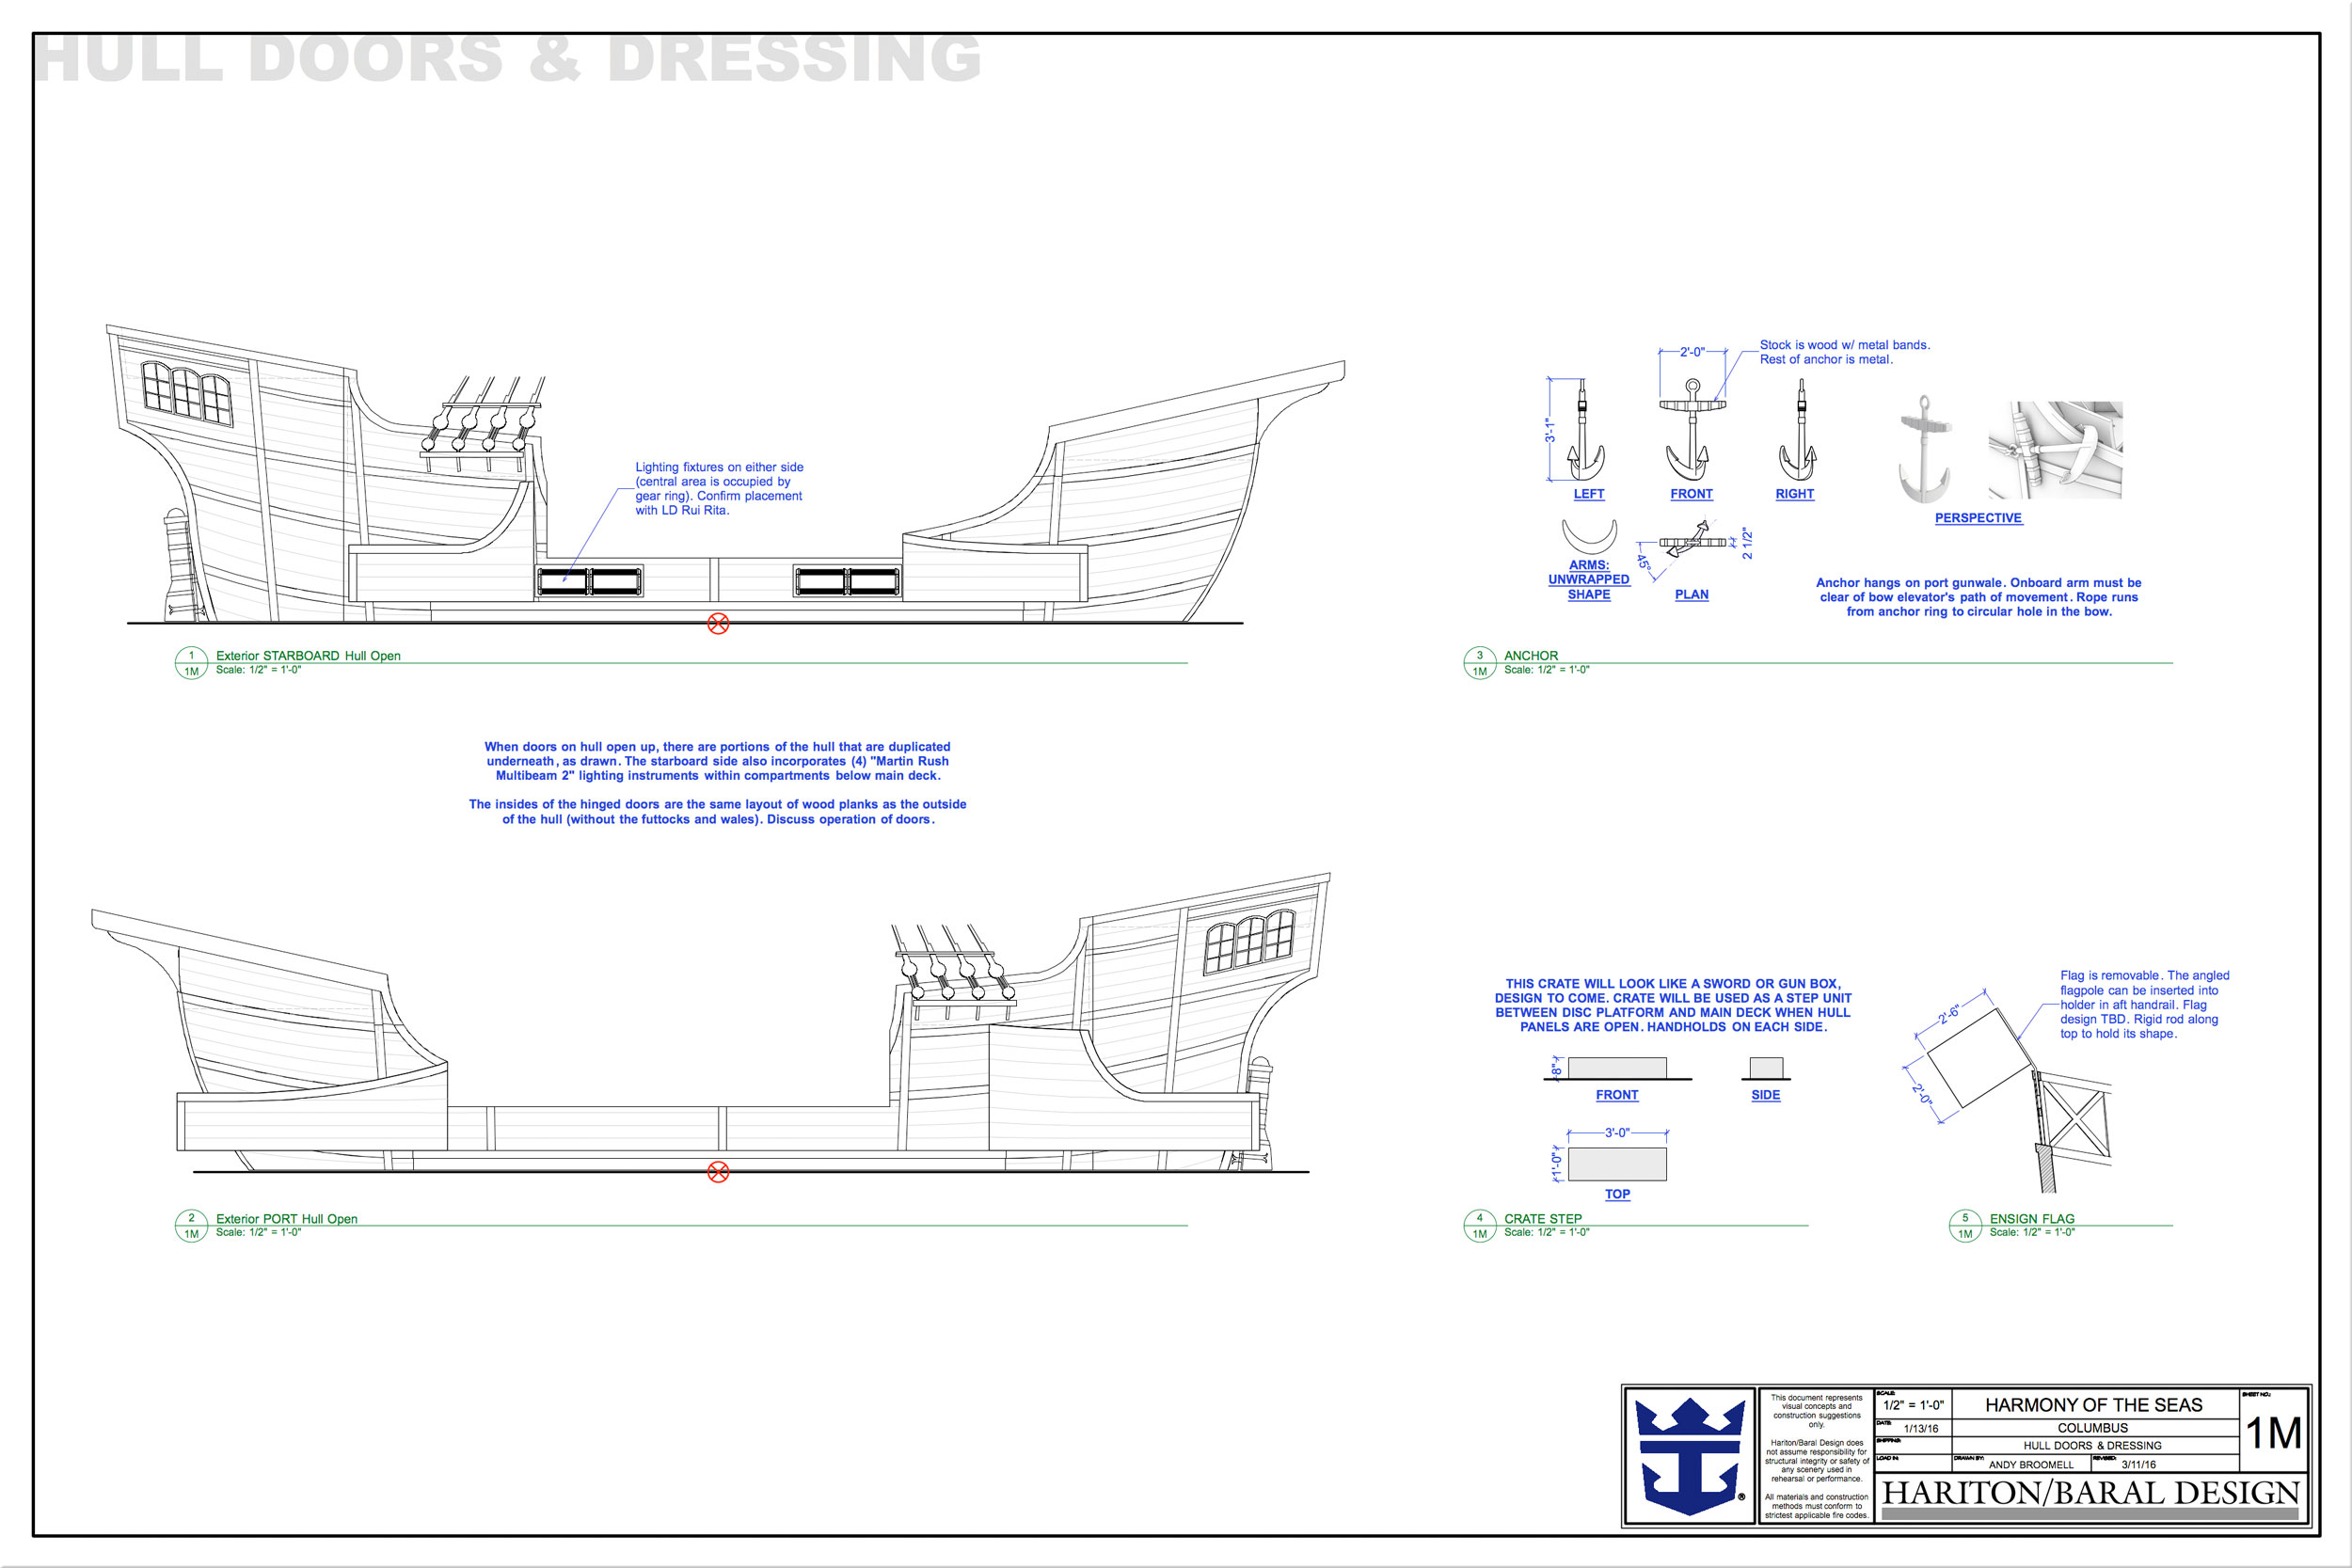 andy-broomell-drafting-columbus12-musical-vectorworks-scenic-design-scenery-plans-sailing-ship.jpg